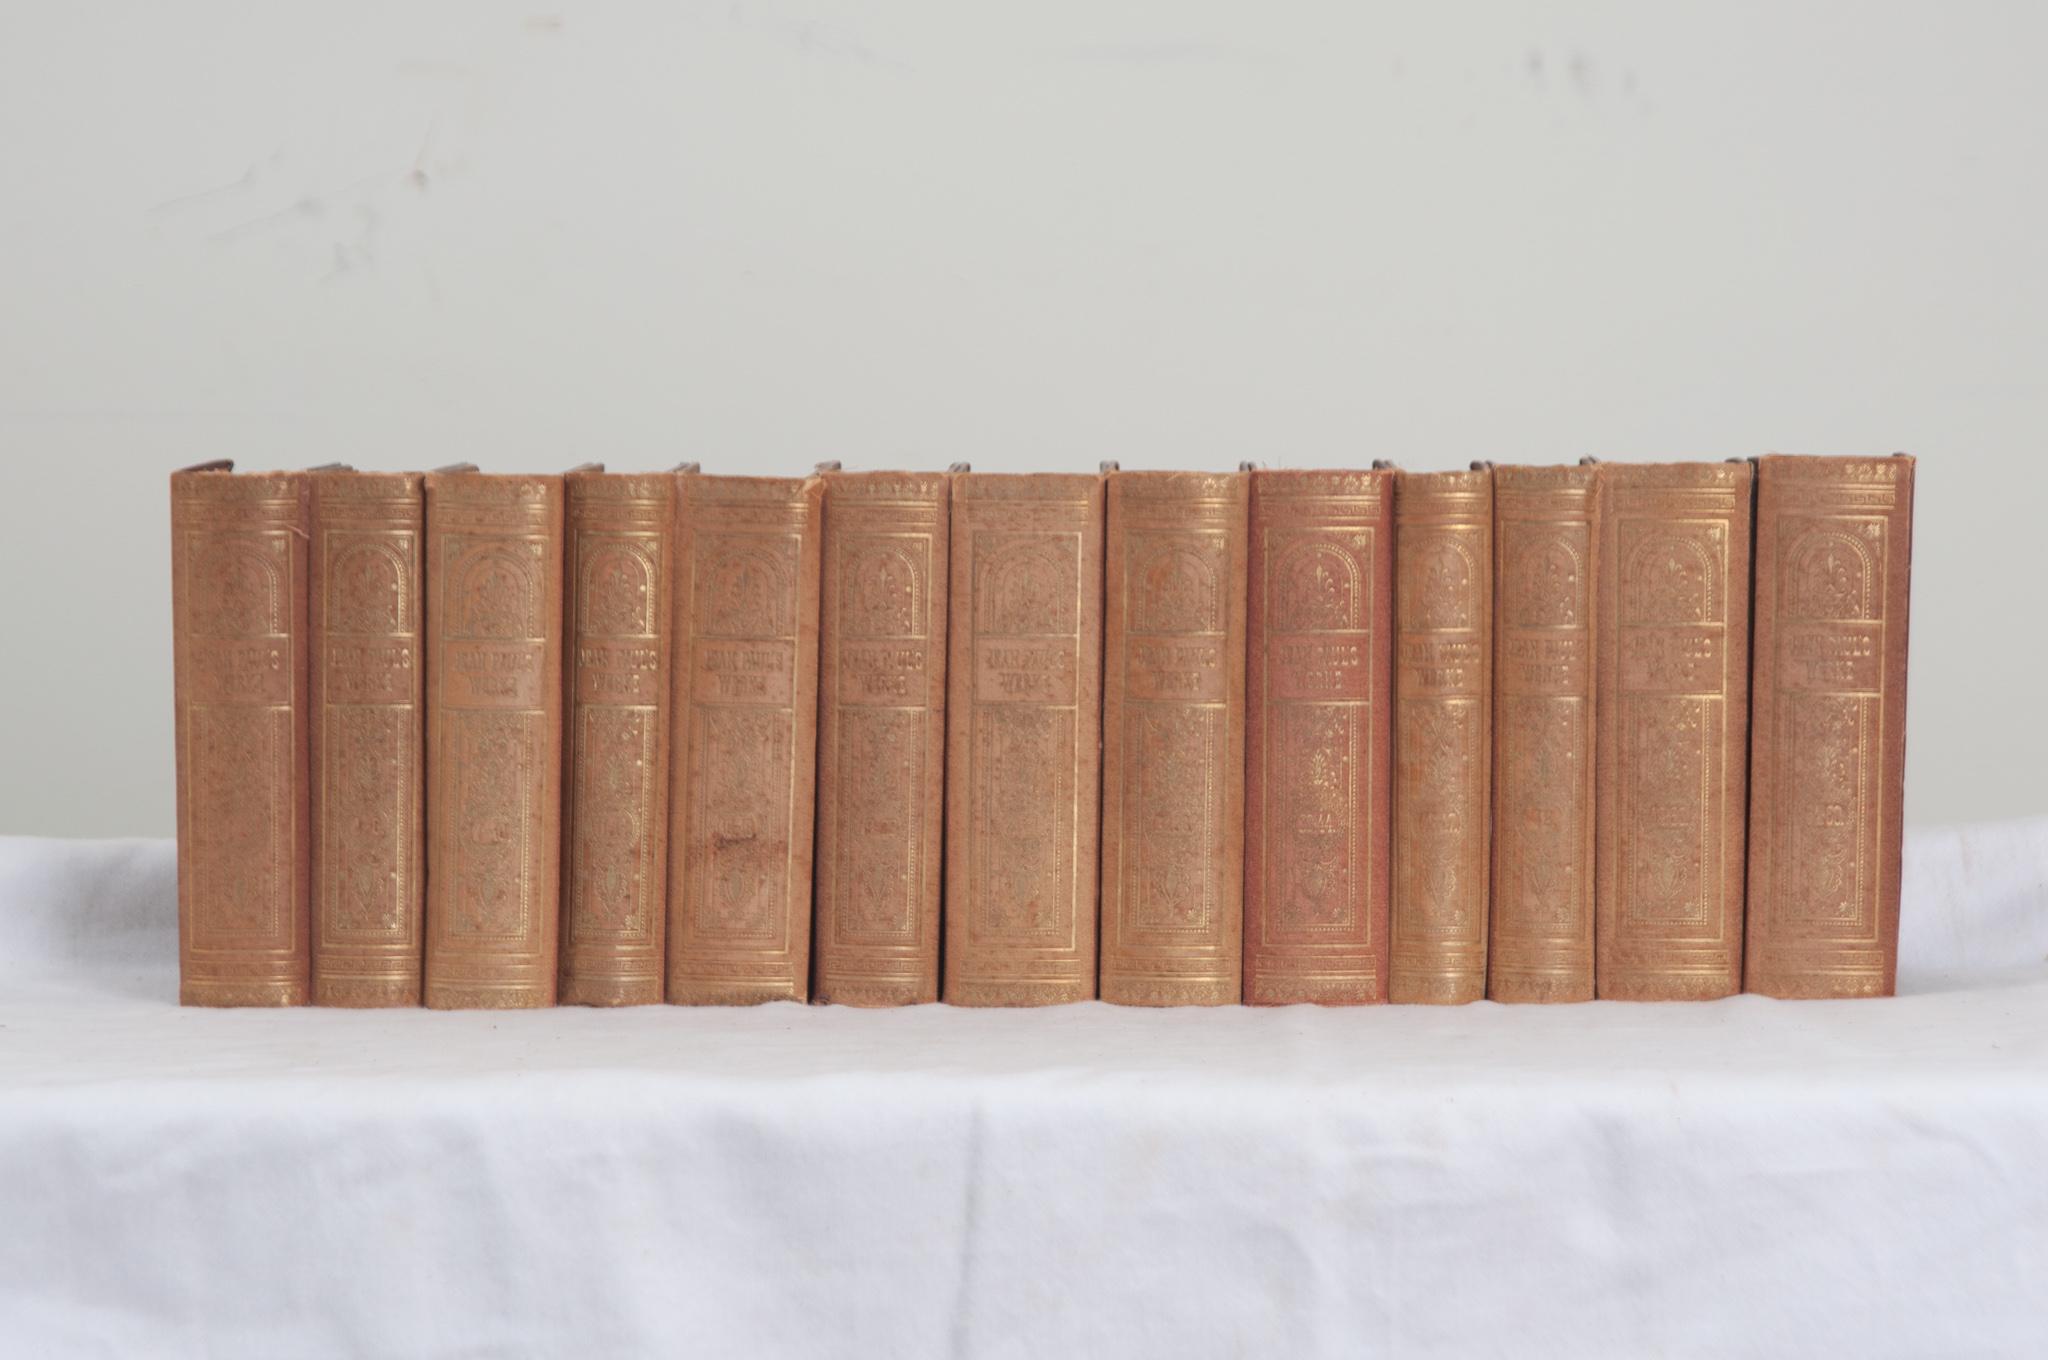 A collection of thirteen volumes by the German novelist, Jean Paul; titled Jean Paul’s Werke from 1783-1822. This set of books are bound in pressed fabric with gold lettering. Inside the interiors are lined in marbled paper. There are minor signs of